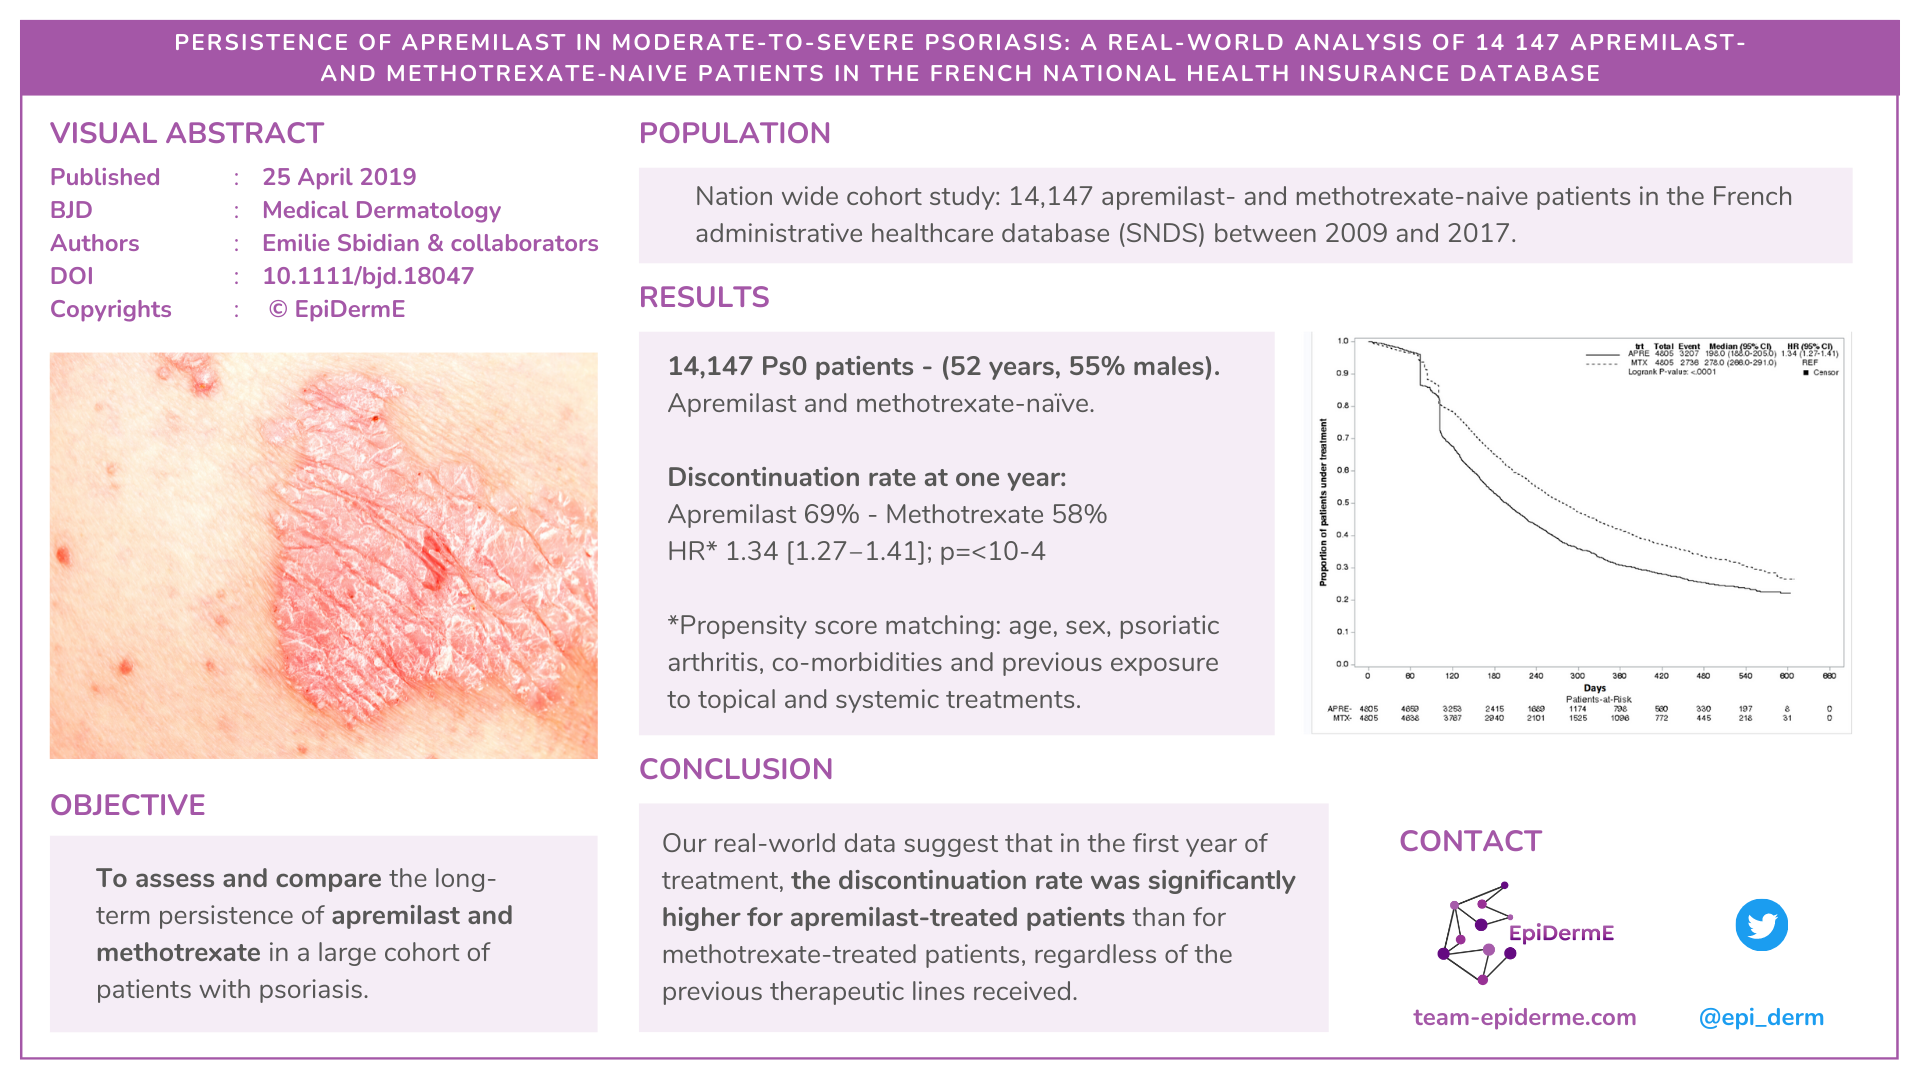 Persistence of apremilast in moderate-to-severe psoriasis: a real-world analysis of 14 147 apremilast- and methotrexate-naive patients in the French National Health Insurance database